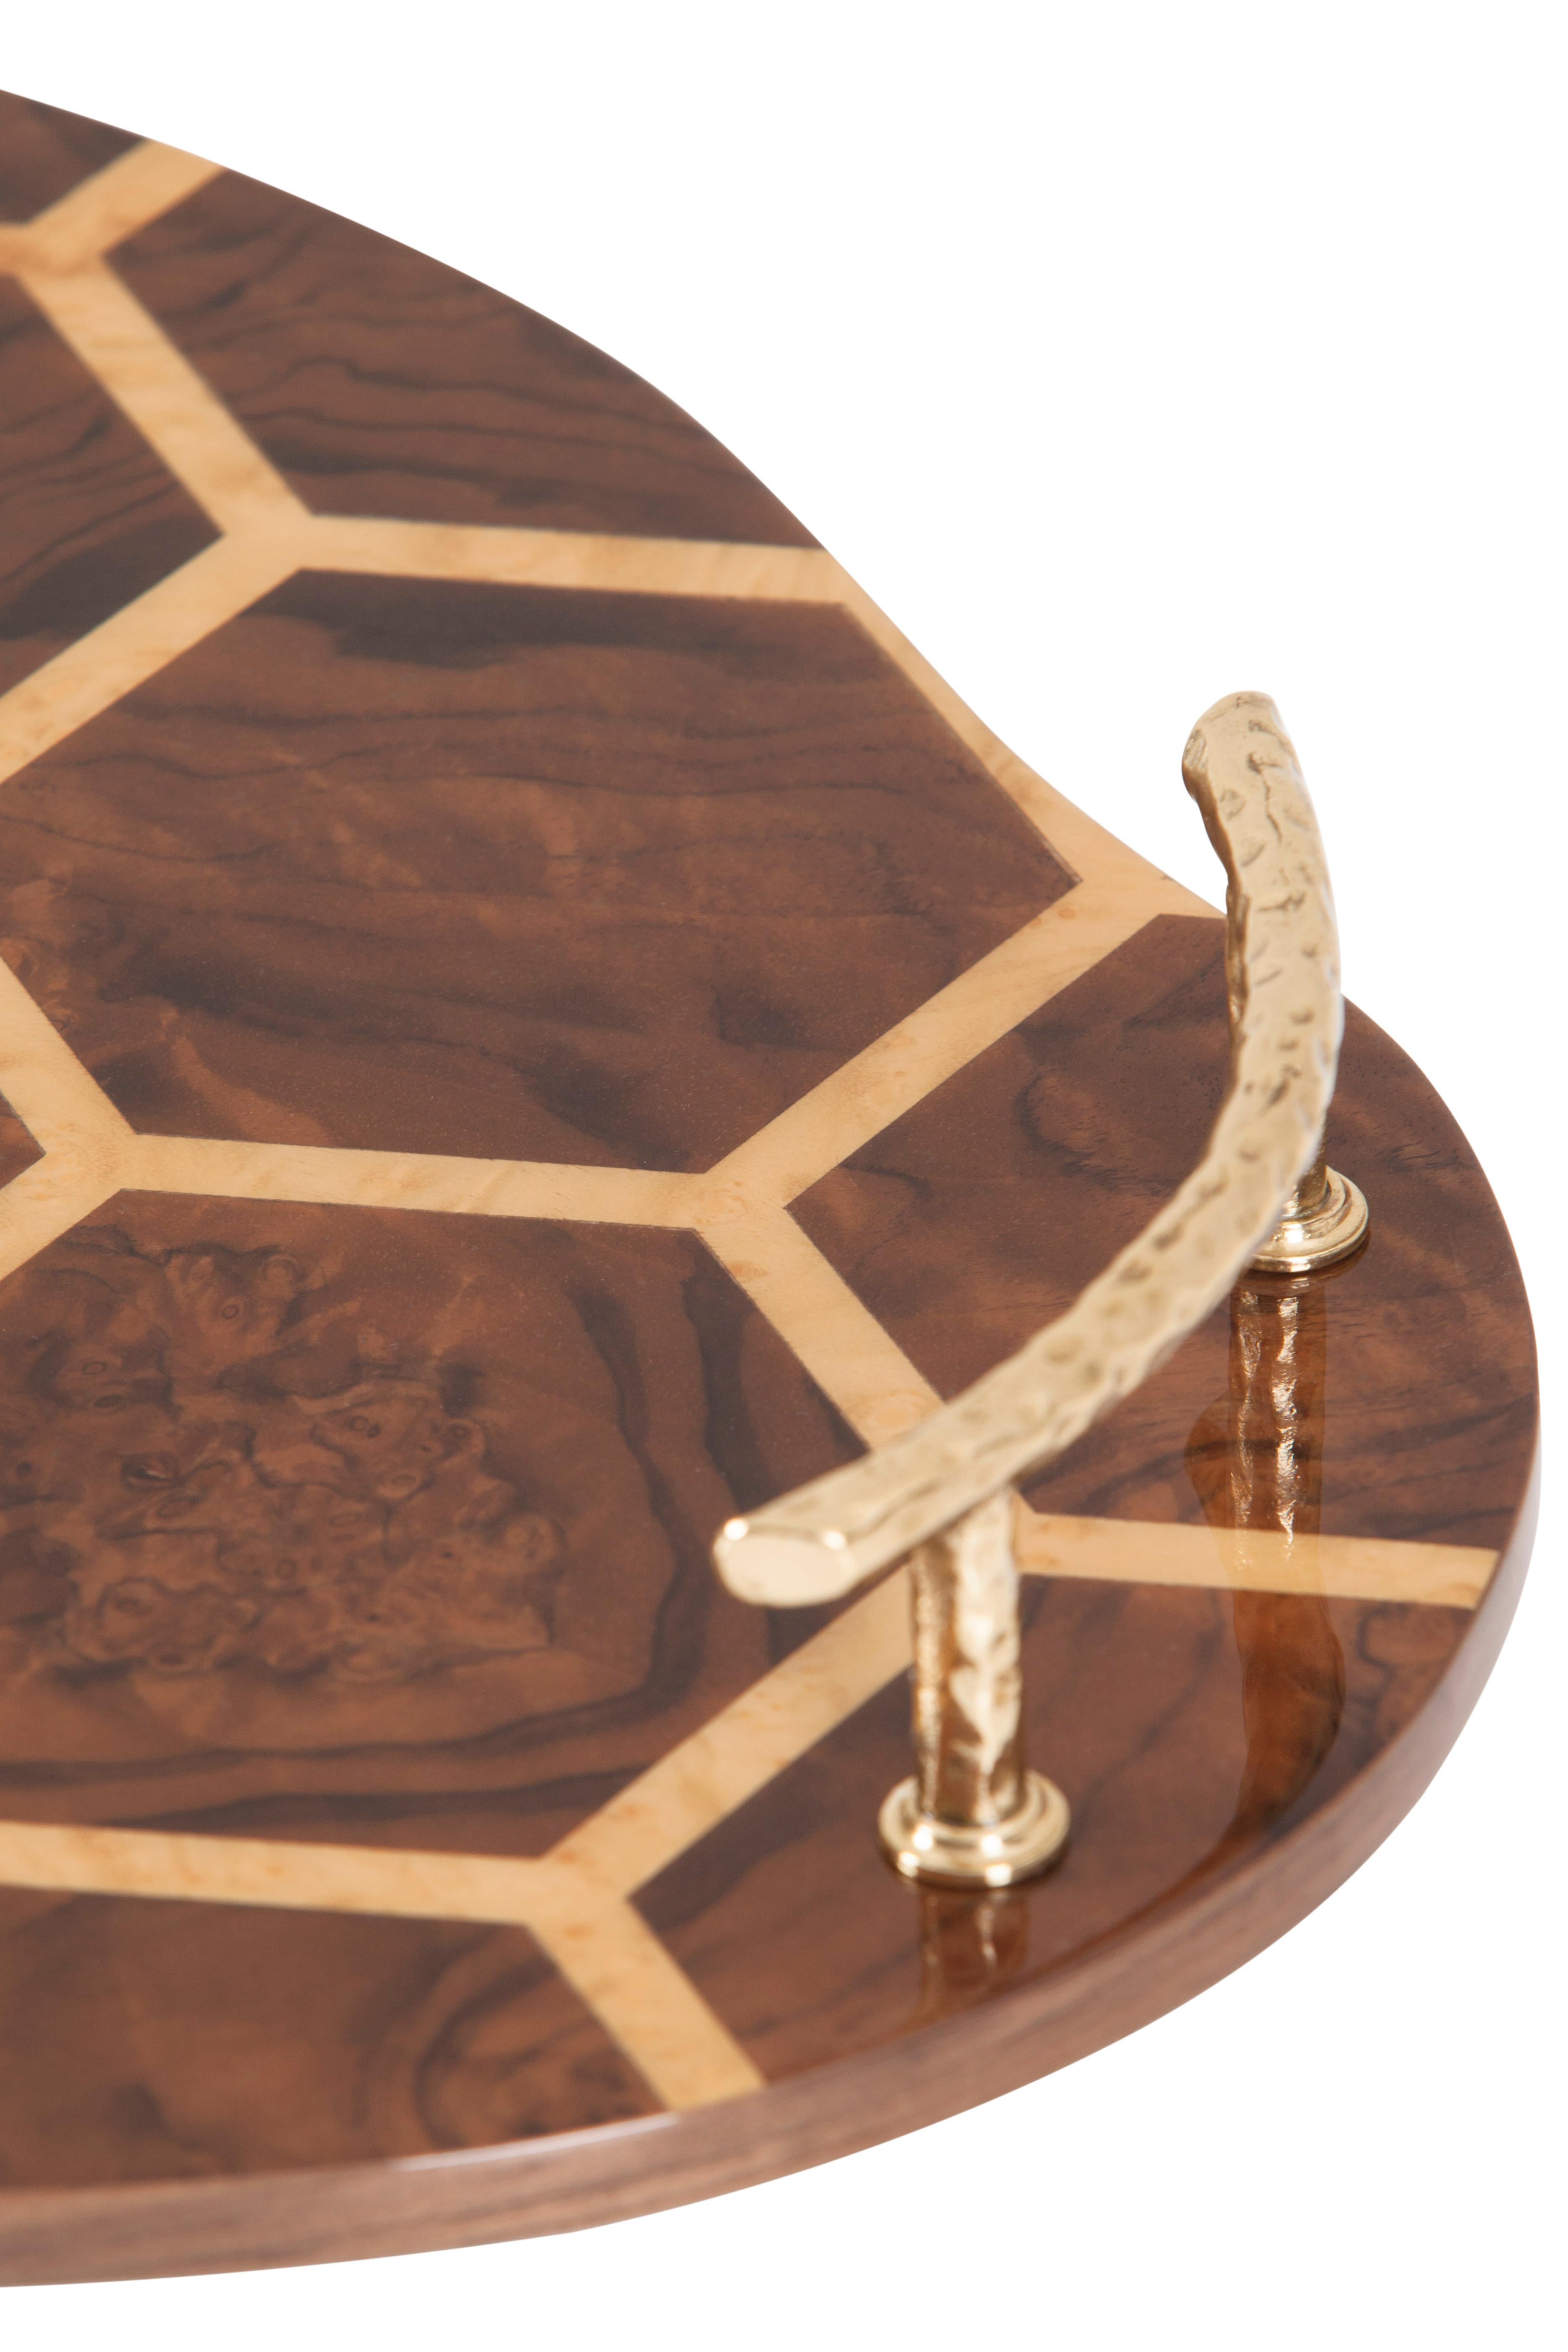 Serving Tray Sakai, Lusitanus Home Collection, Handcrafted in Portugal - Europe by Lusitanus Home.

Handcrafted with precision and care, the Sakai serving tray presents the art of marquetry in its most refined form, where high-quality wood veneers